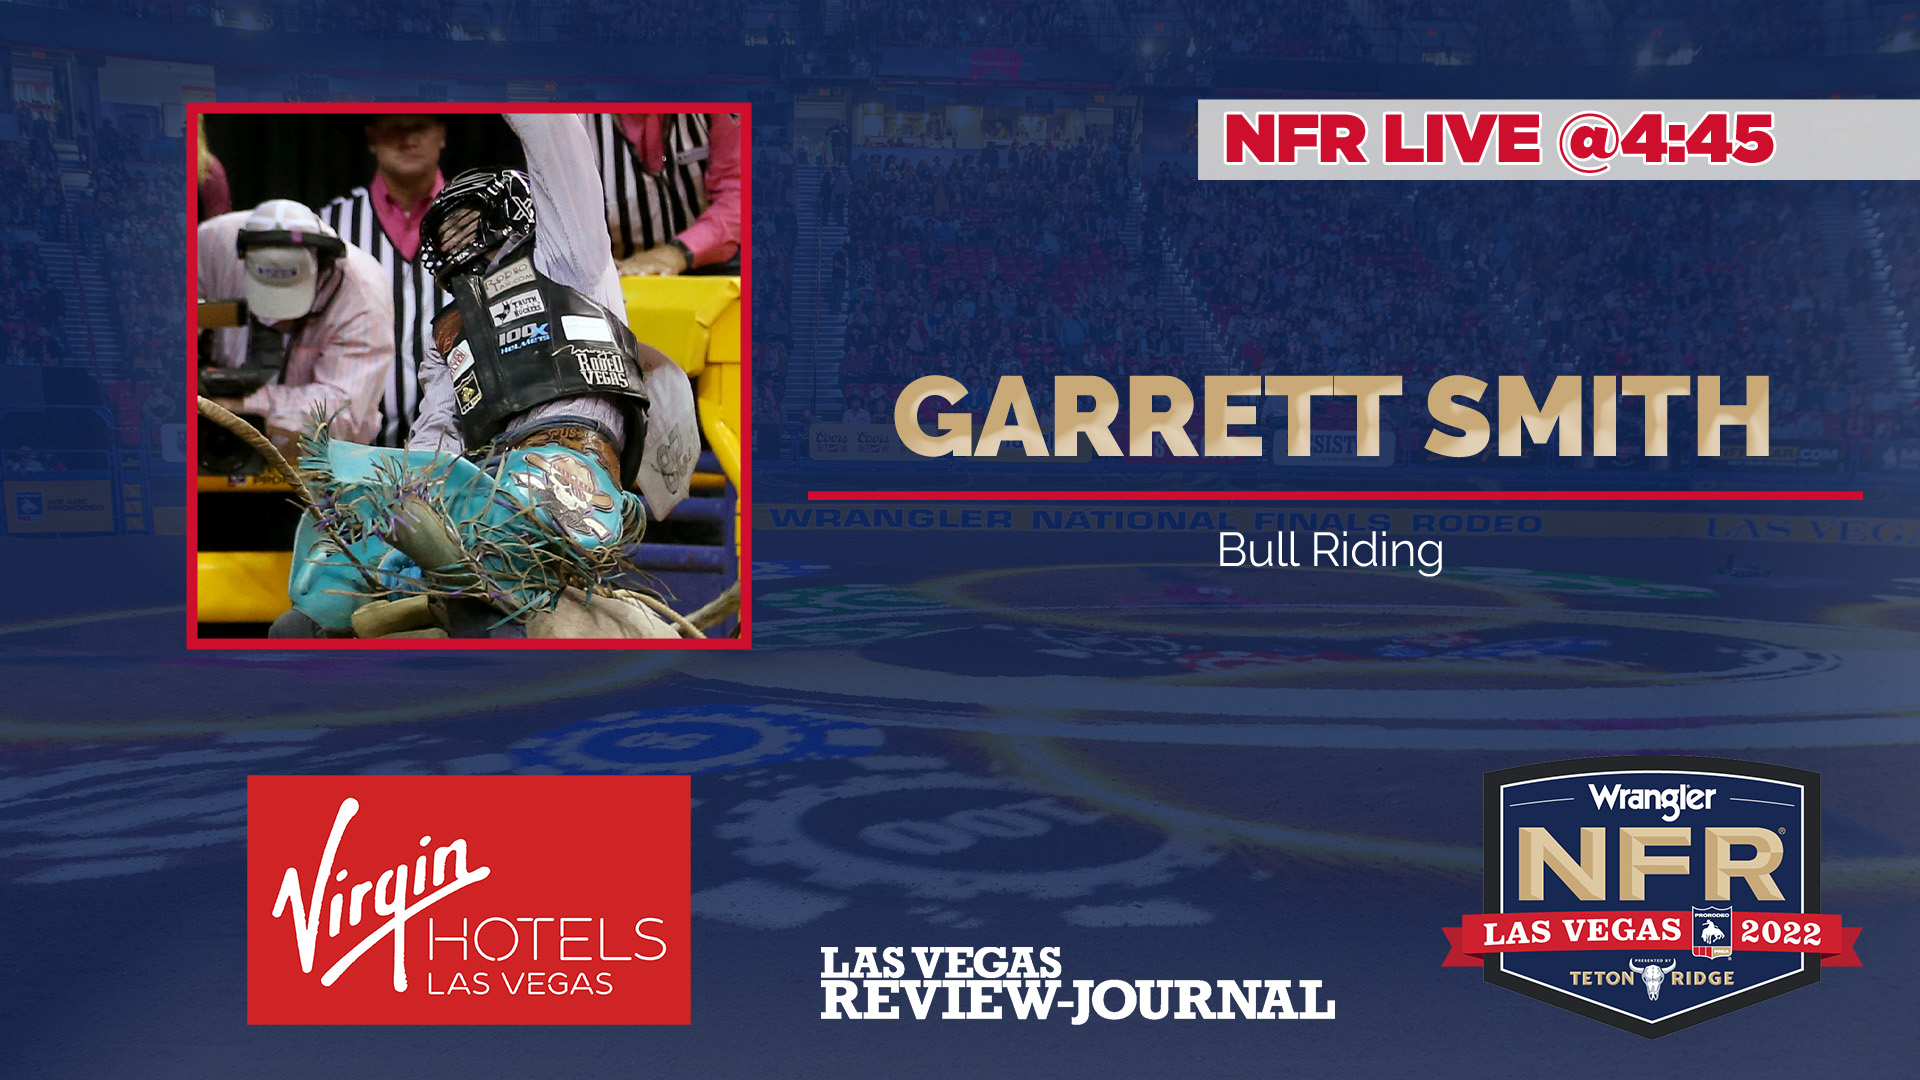 Bull rider Garrett Smith joins us from Day 5 of the 2022 Wrangler National Finals Rodeo